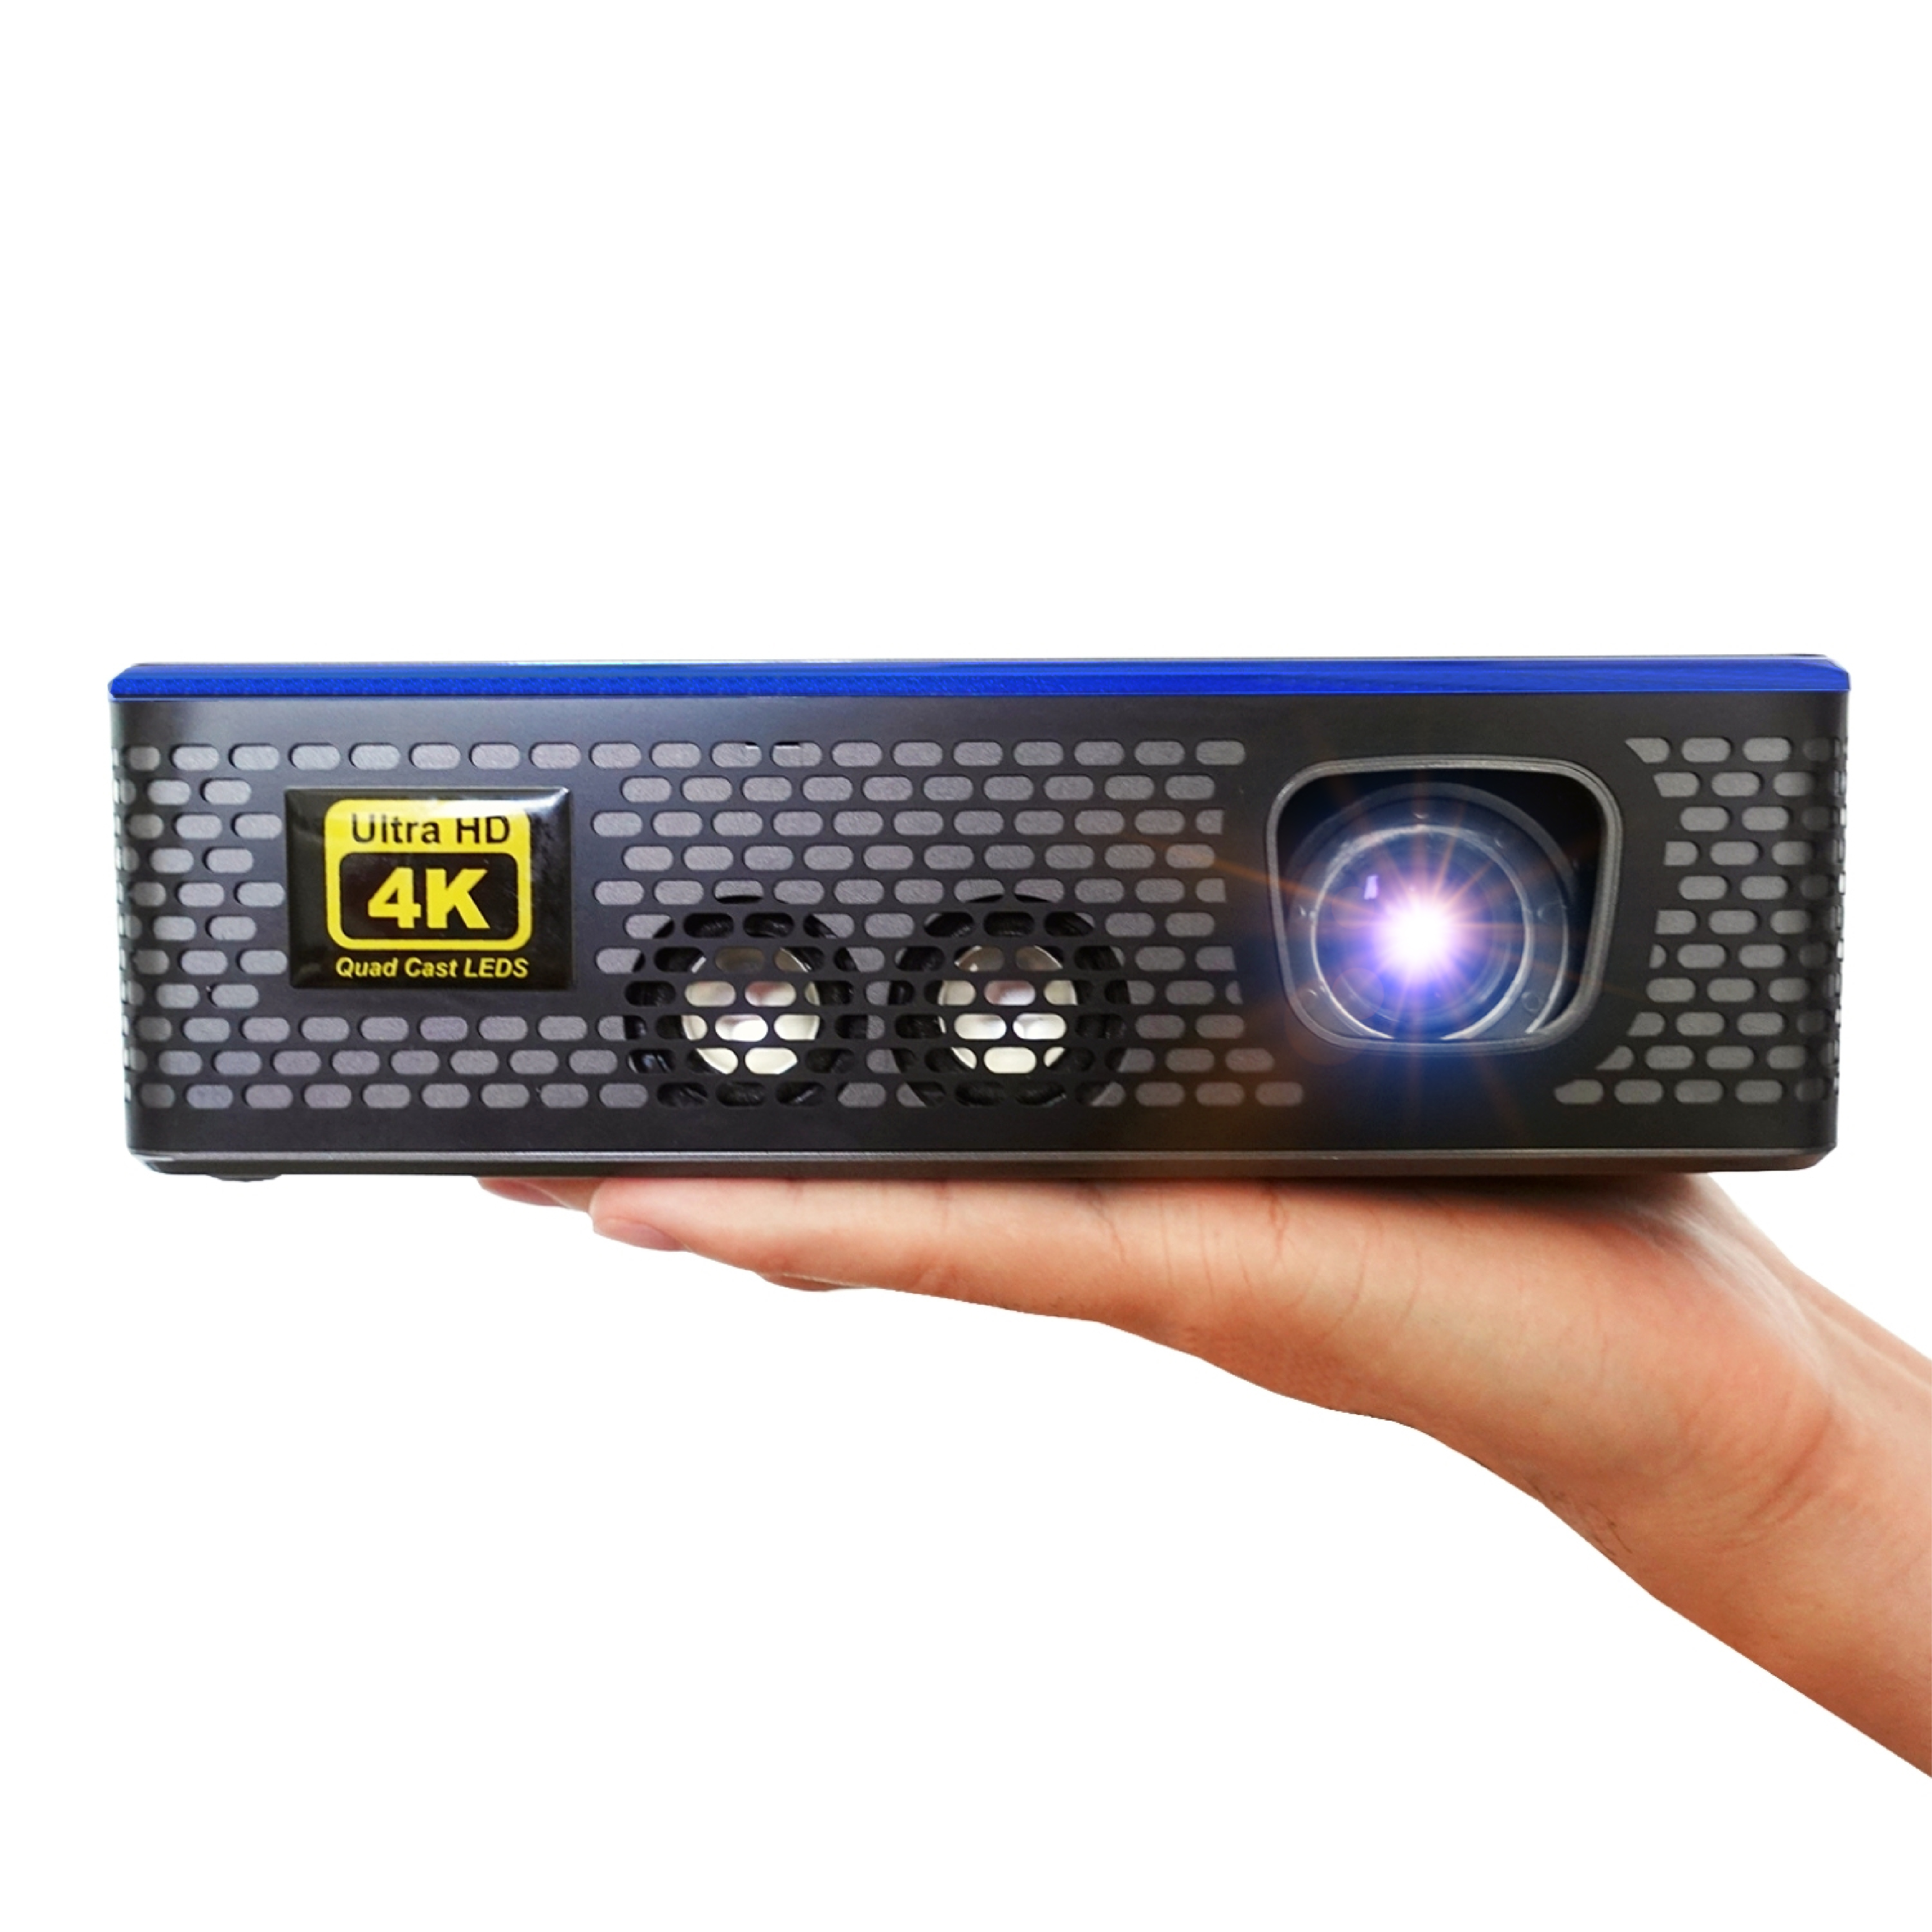 AAXA 4K1 DLP Portable 4K Home Theater Projector, Dual HDMI, Native 4K UHD Resolution, 1500 Lumen, Onboard Media Player, USB/MicroSD, 200" Screen for Movie and Office Use, 30k LED, DLP Mini Projector - image 1 of 7